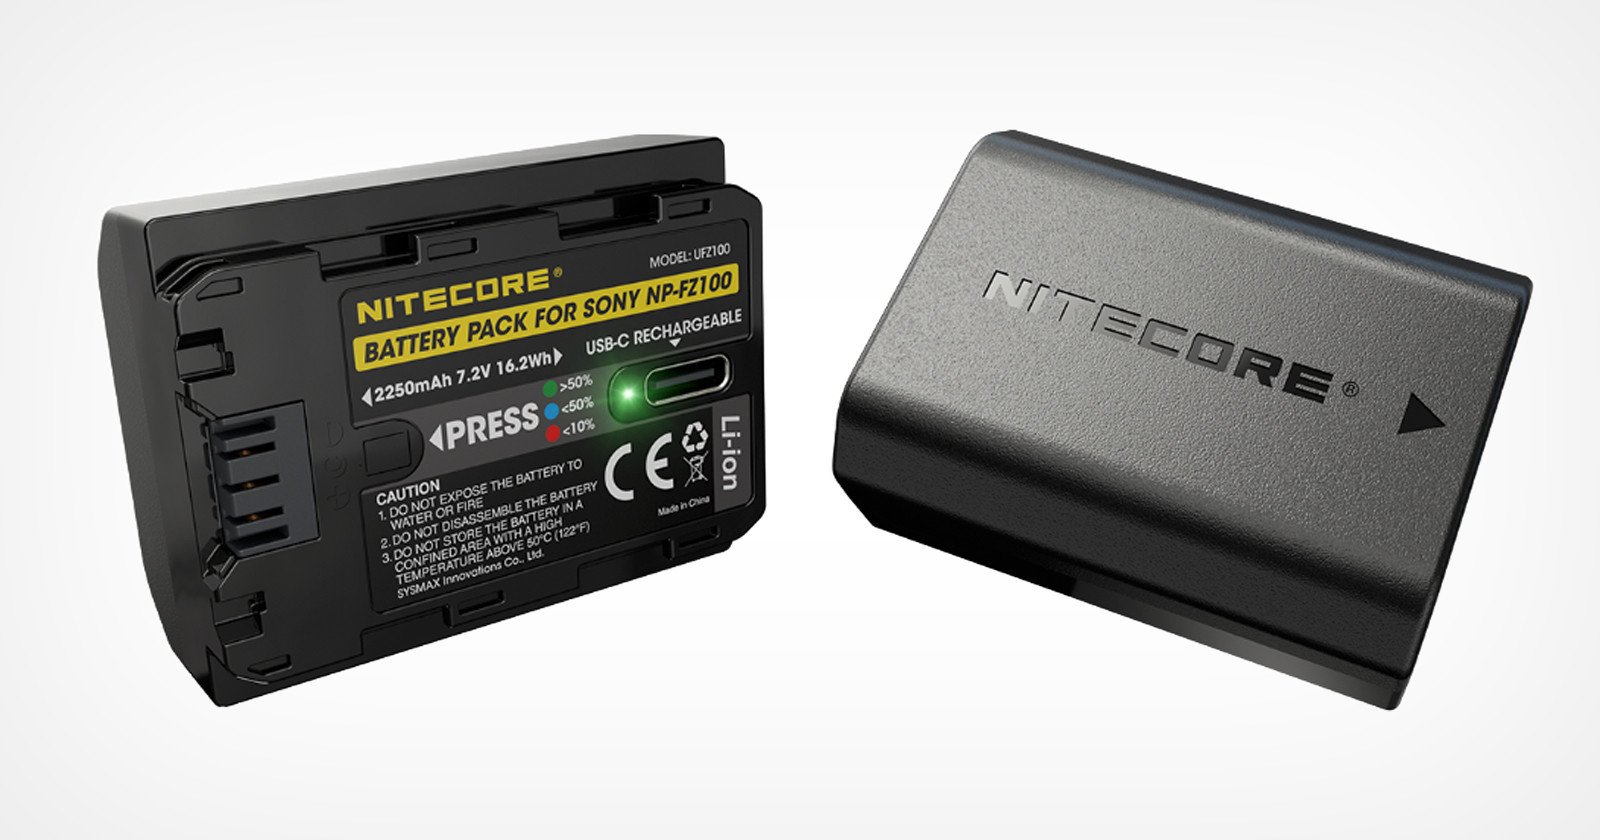  nitecore sony camera battery charges via integrated usb-c 